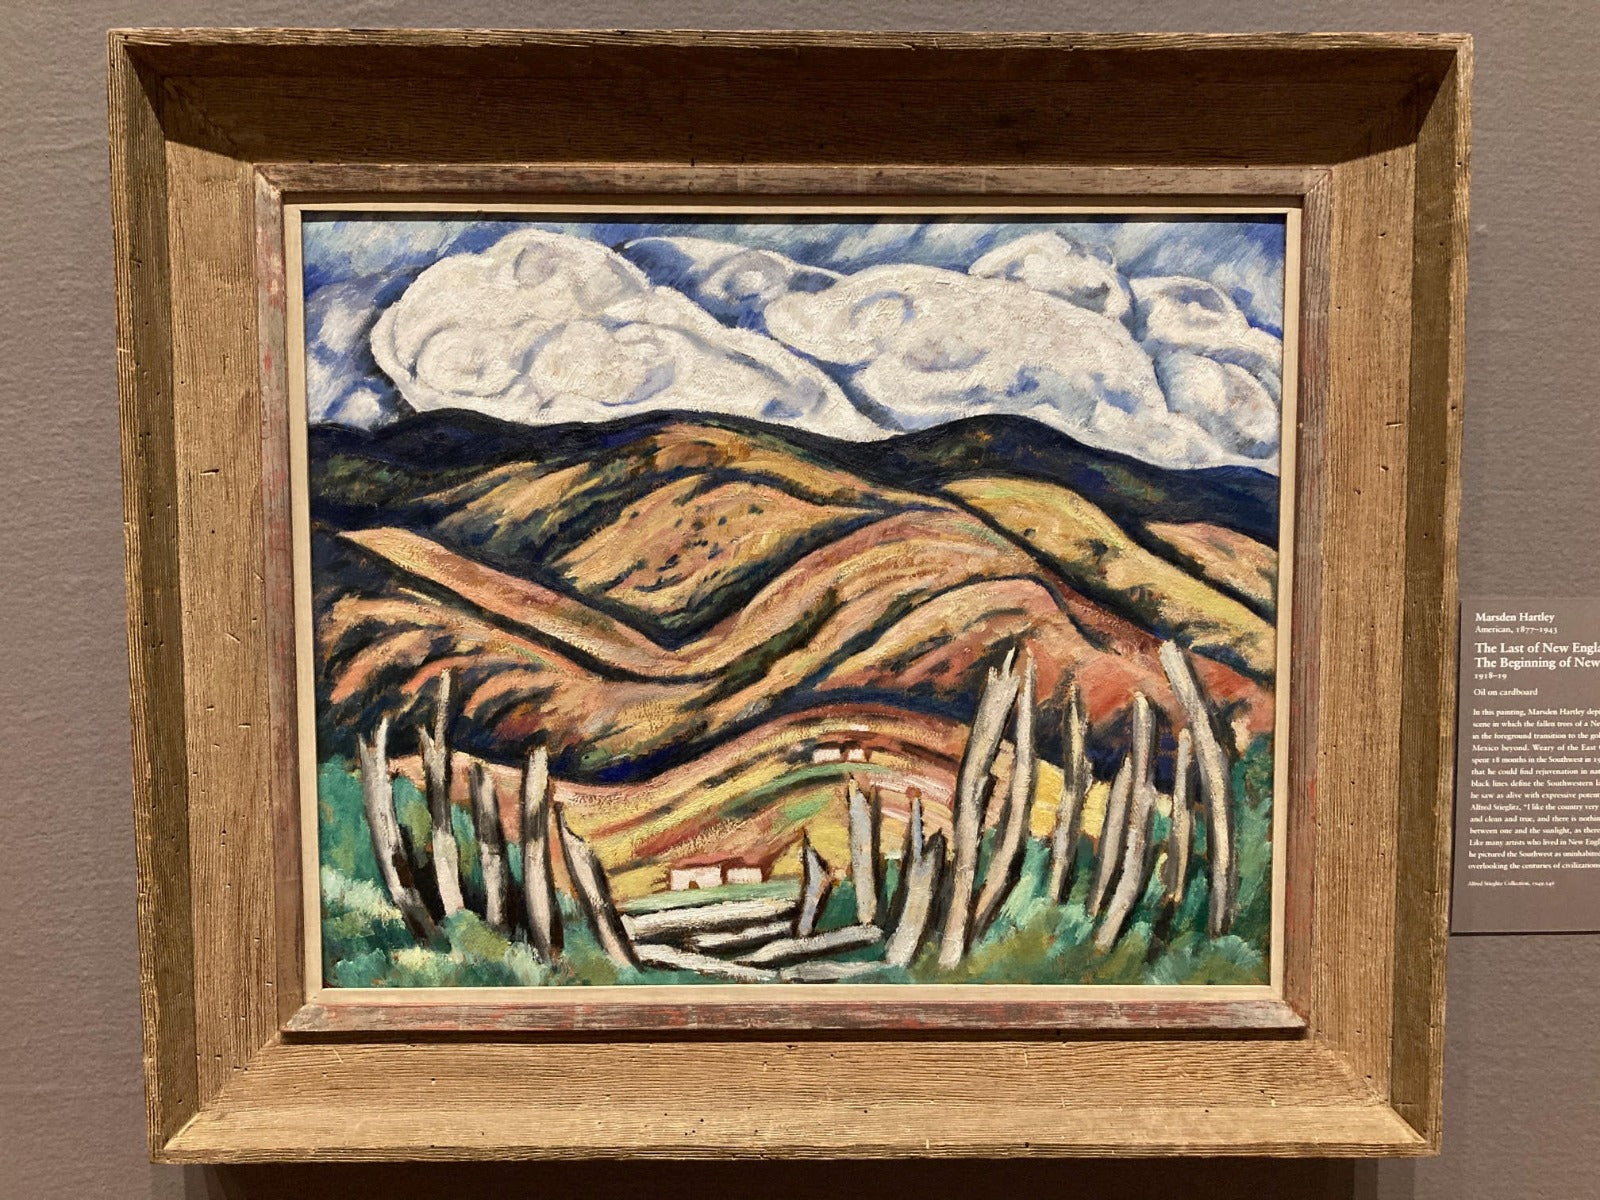 Marsden Hartley, The Last of New England - The Beginning of New Mexico (1918-19). Photo by Chadd Scott